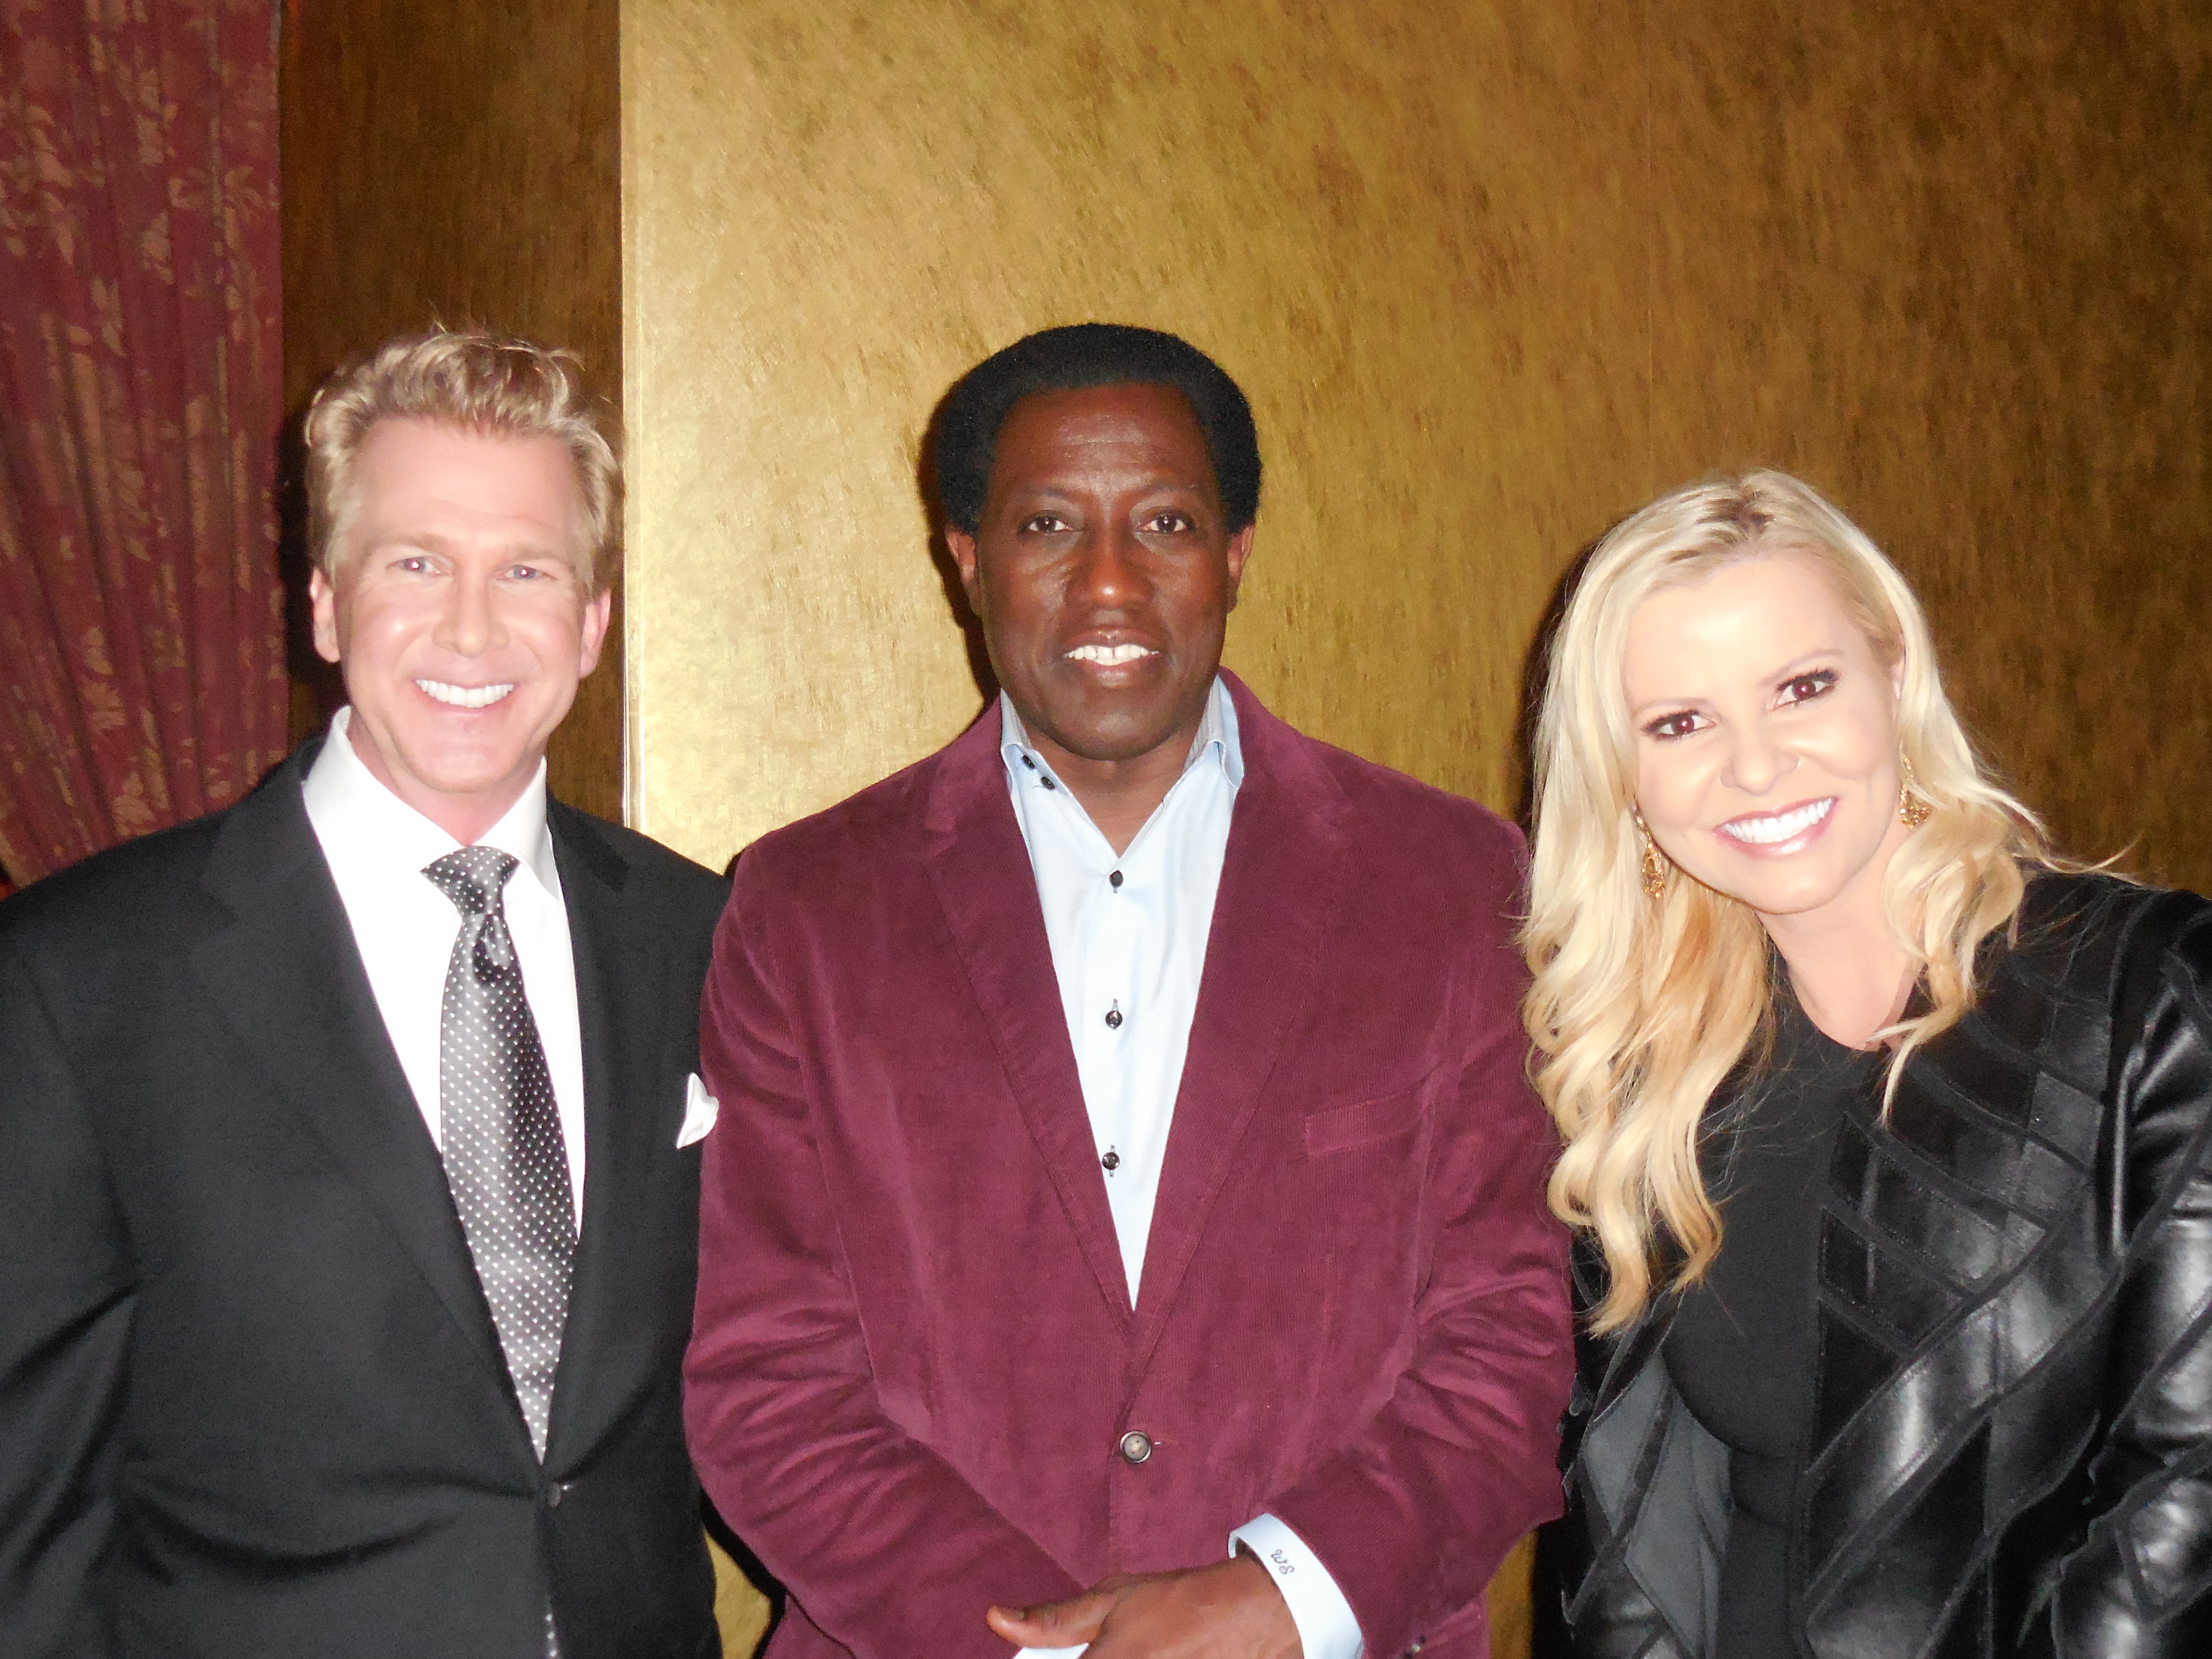 Creighton Rothenberger, Wesley Snipes and Katrin Benedikt at The Expendables 3 premiere - TCL Chinese Theatre on August 15, 2014 in Hollywood, California.